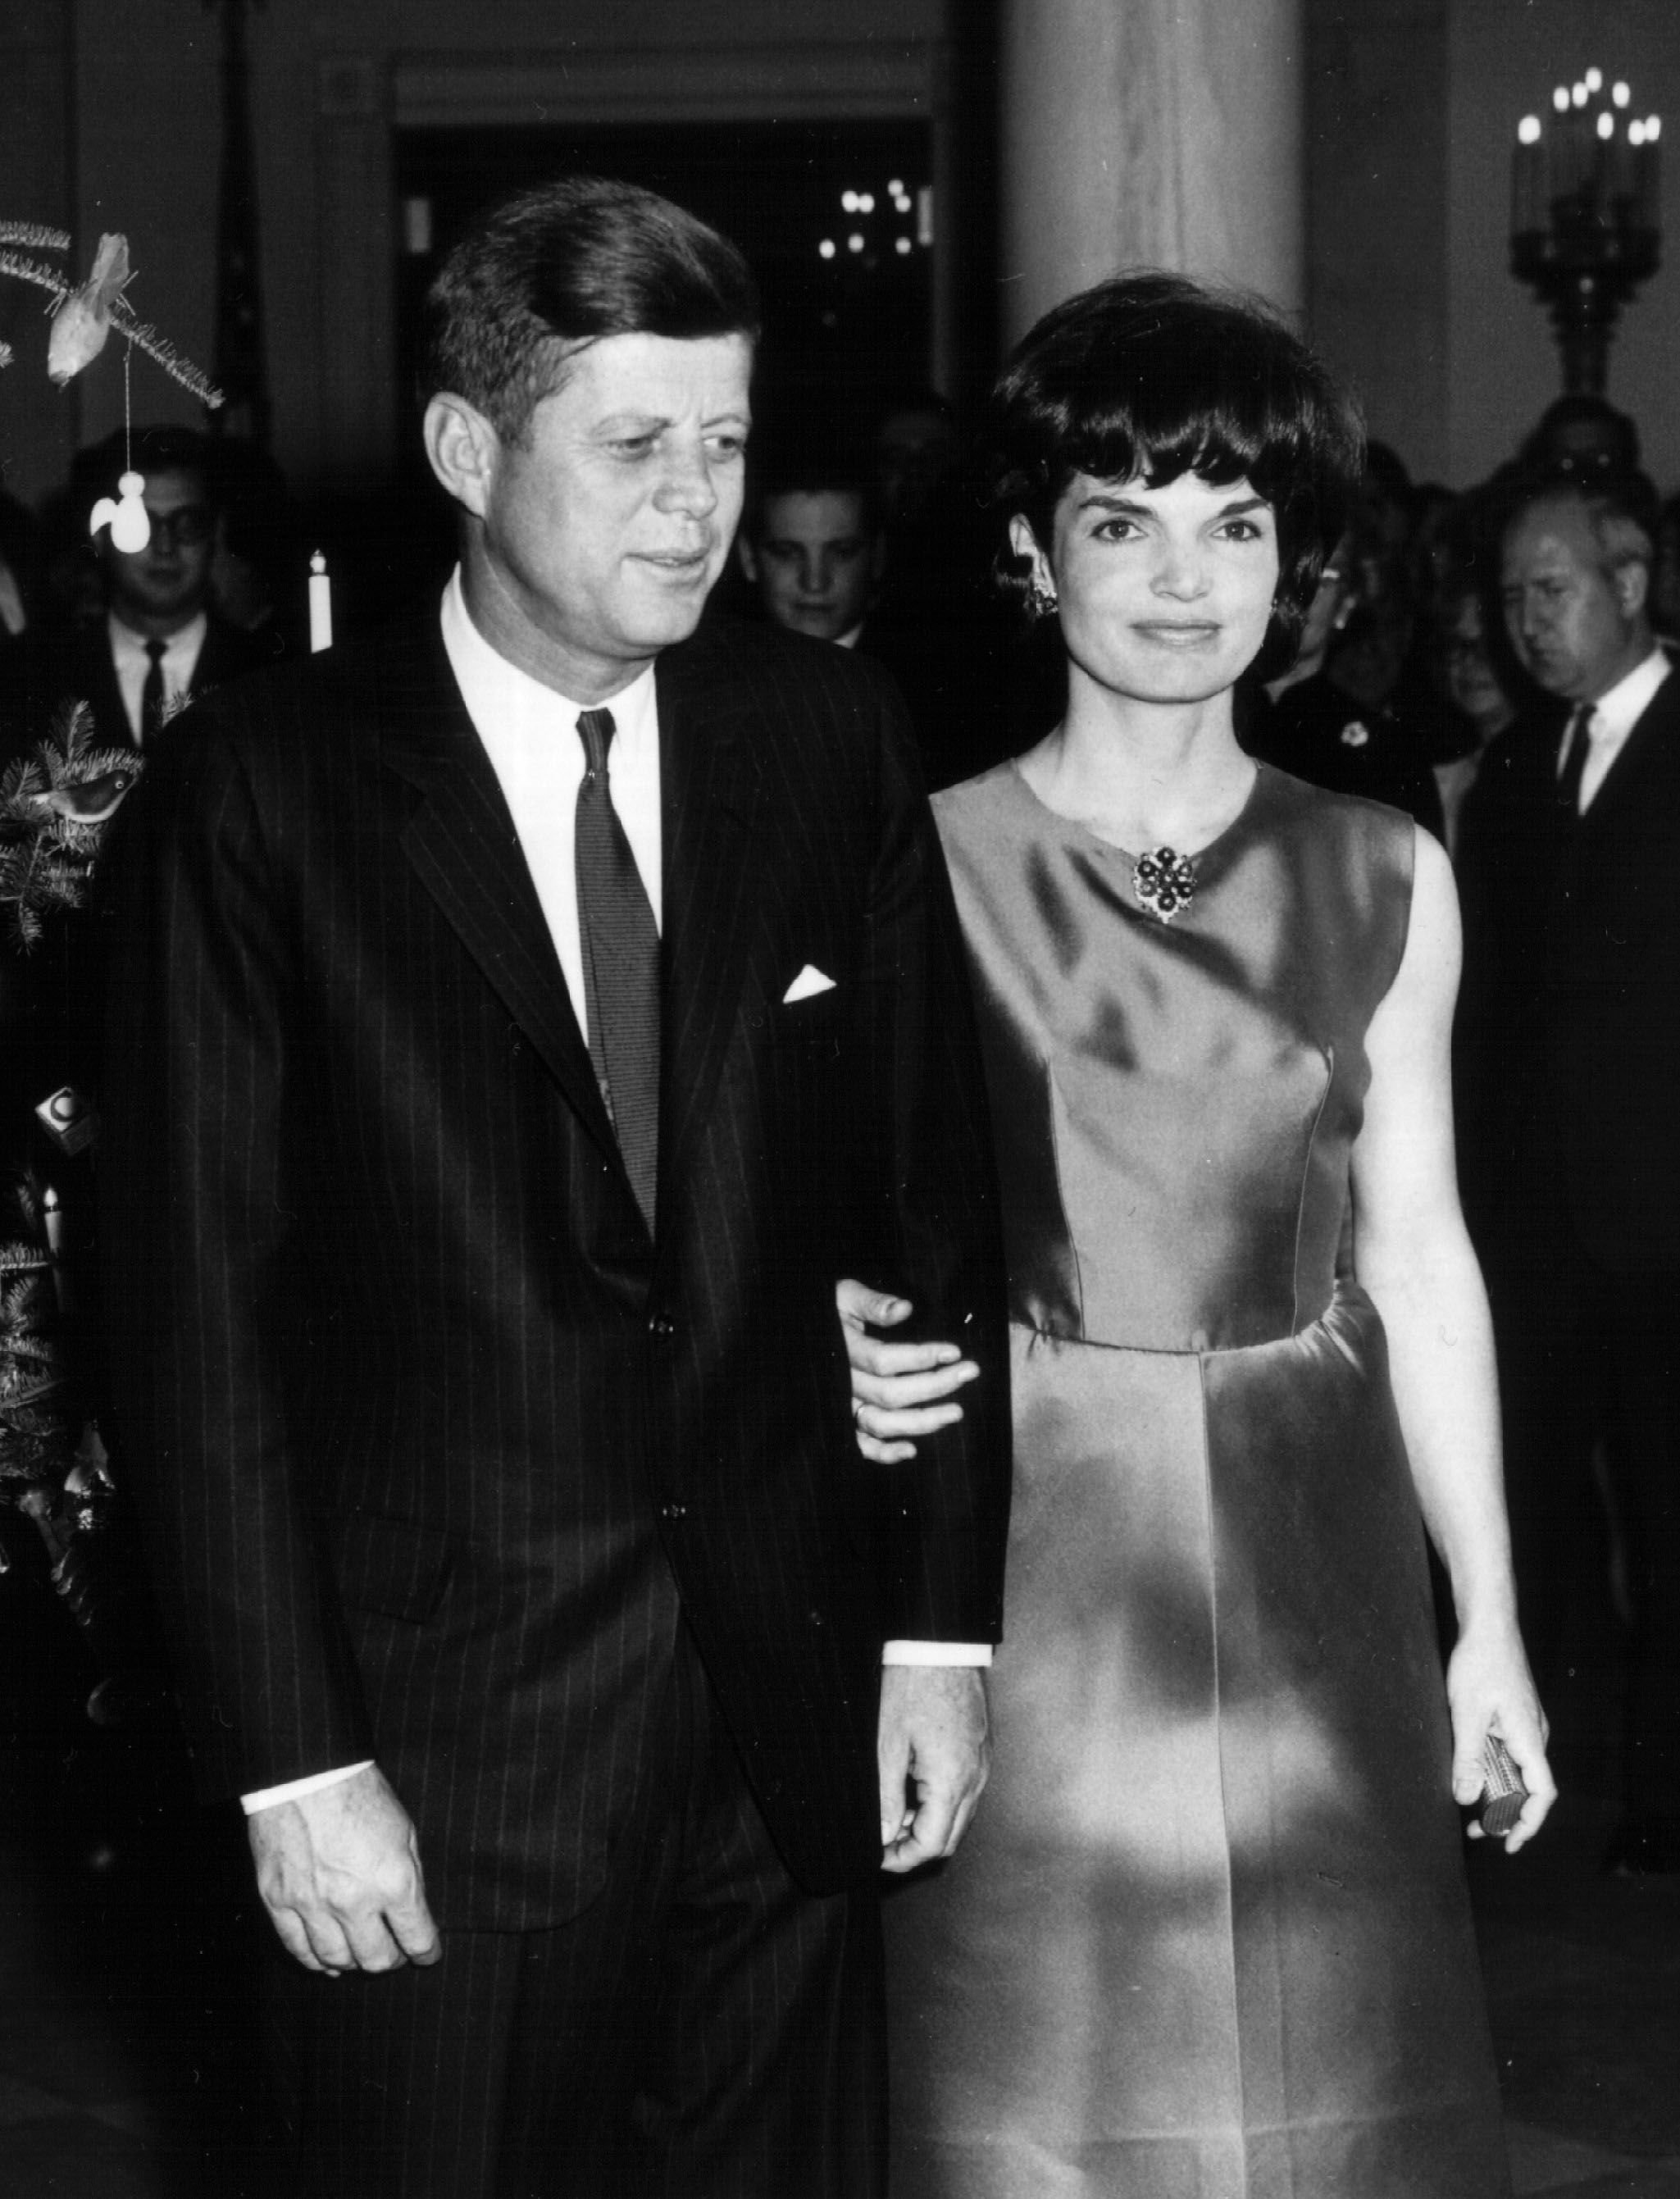 President John F. Kennedy and First Lady Jacqueline Kennedy at a White House Ceremony in December 1962, in Washington, D.C. | Photo: National Archive/Newsmakers/Getty Images